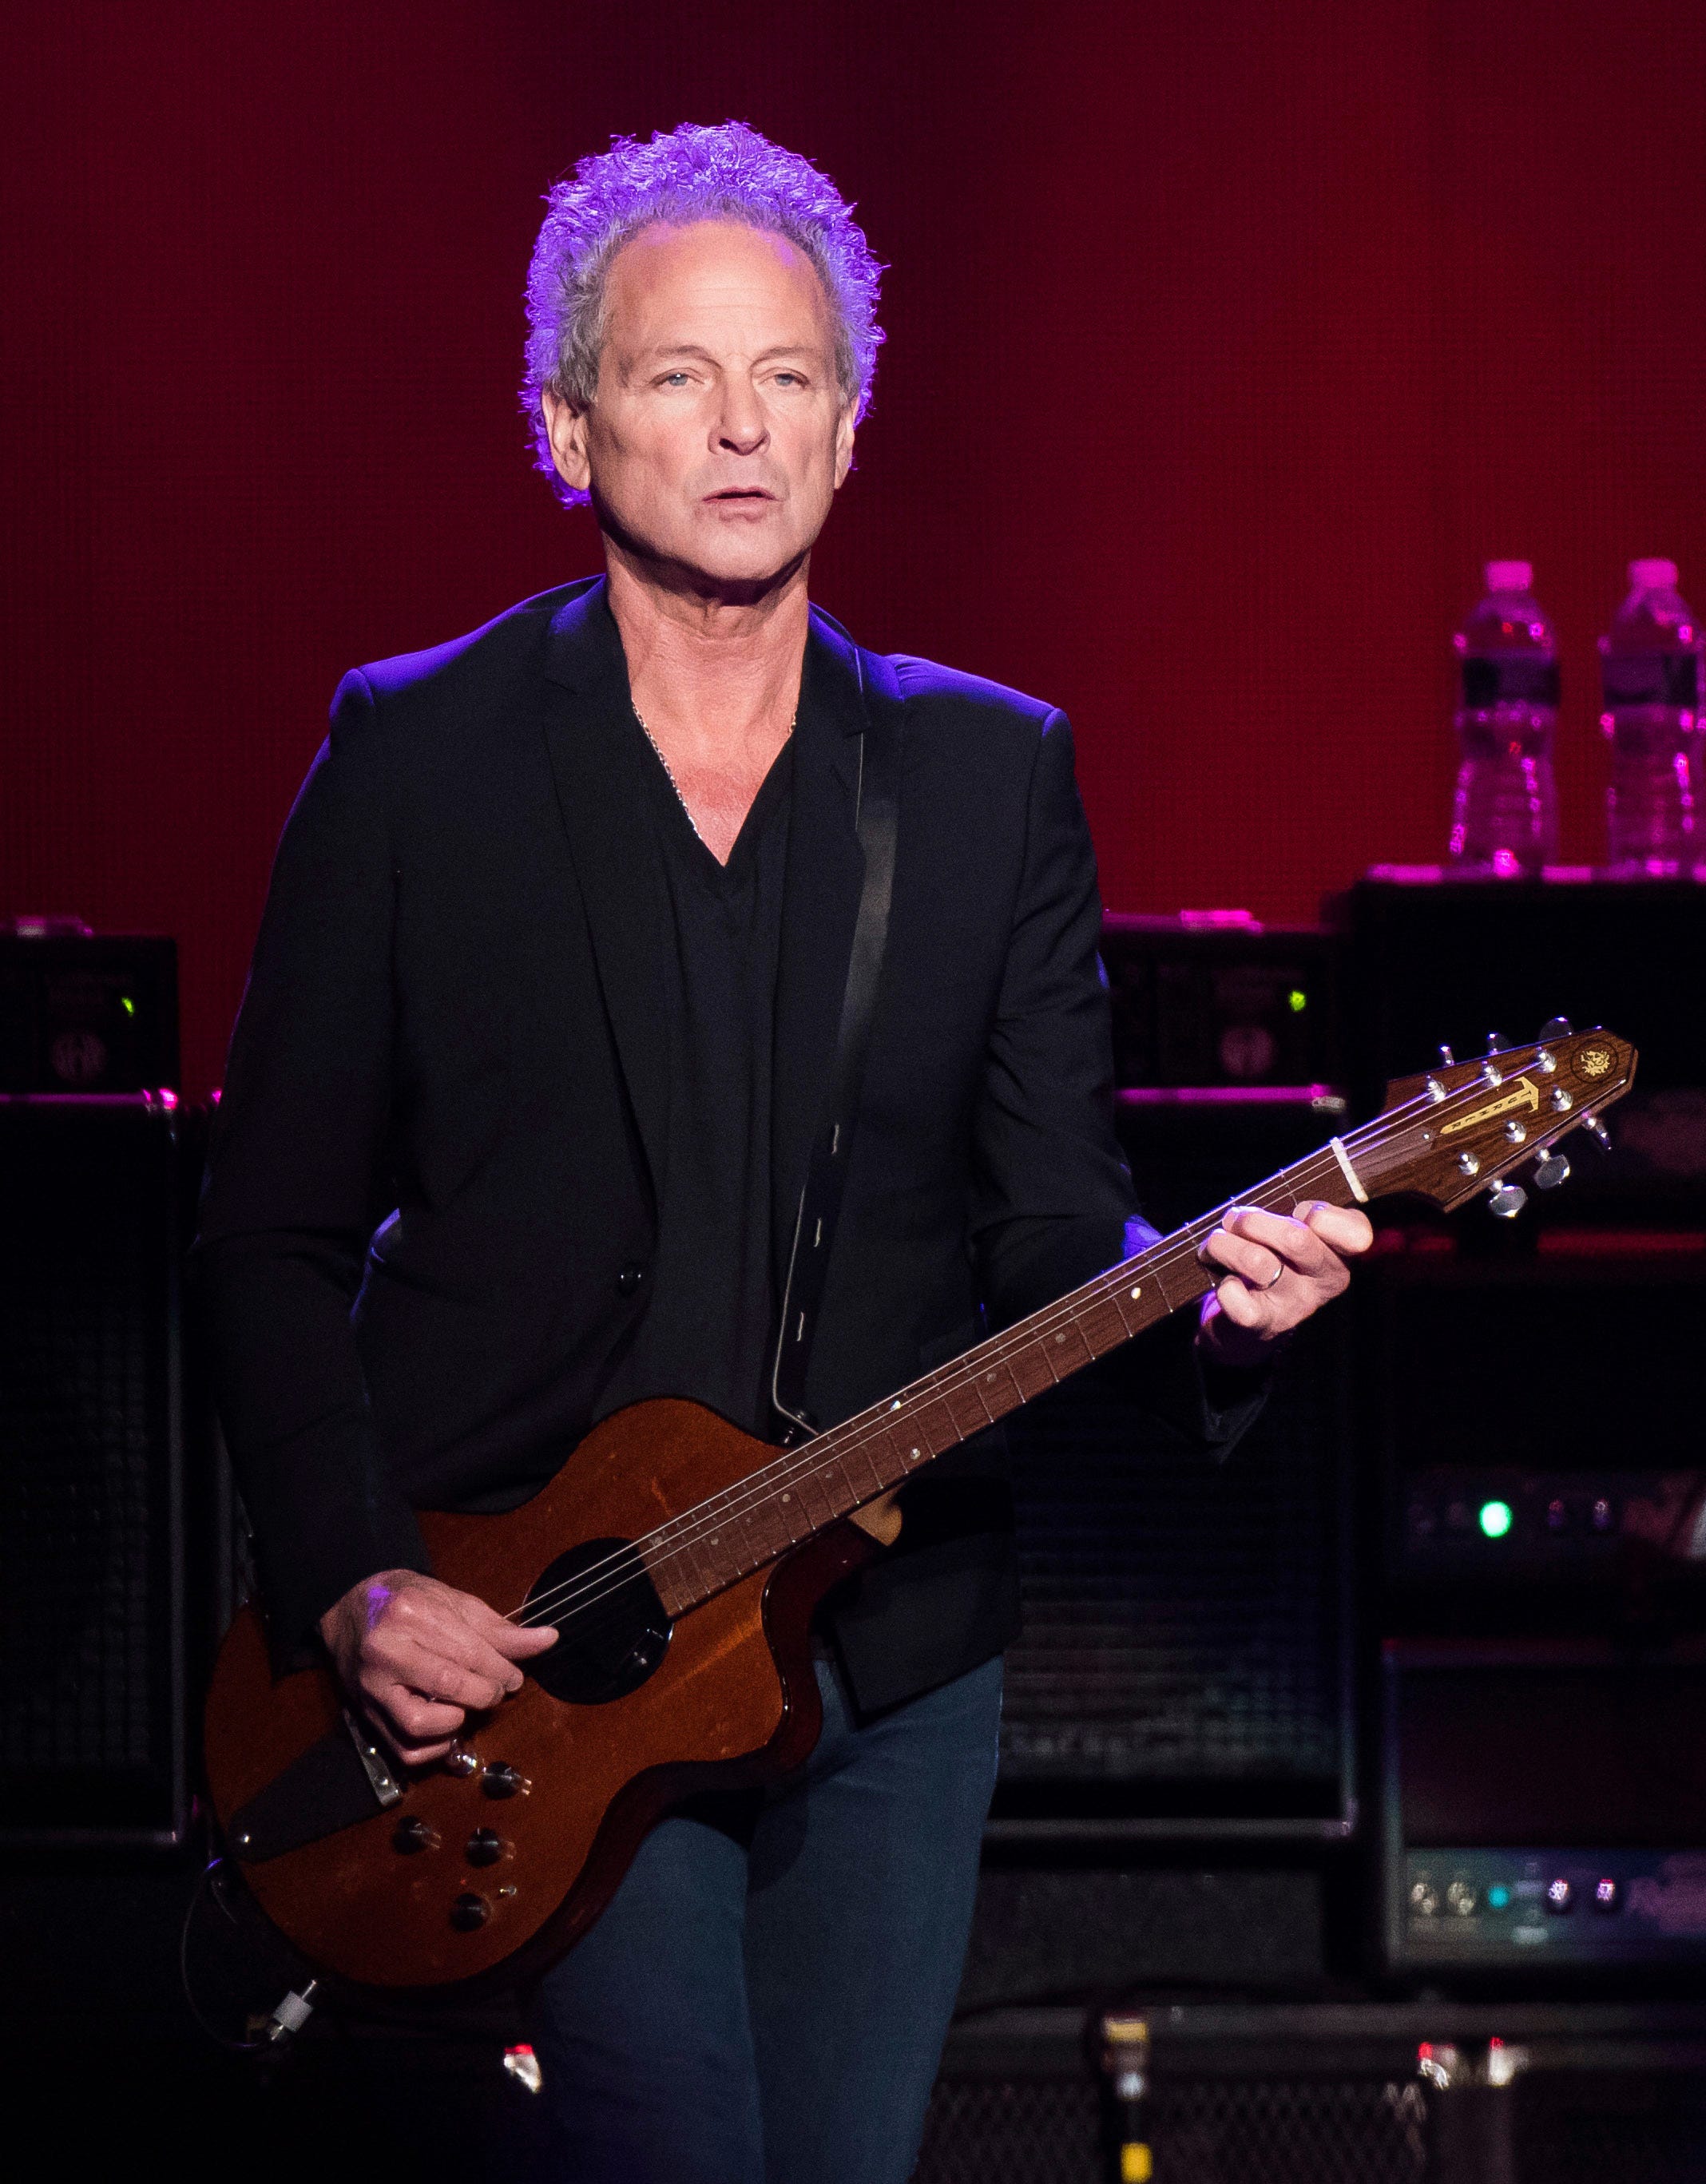 Lindsey Buckingham is opening up about why he was ousted from Fleetwood Mac...